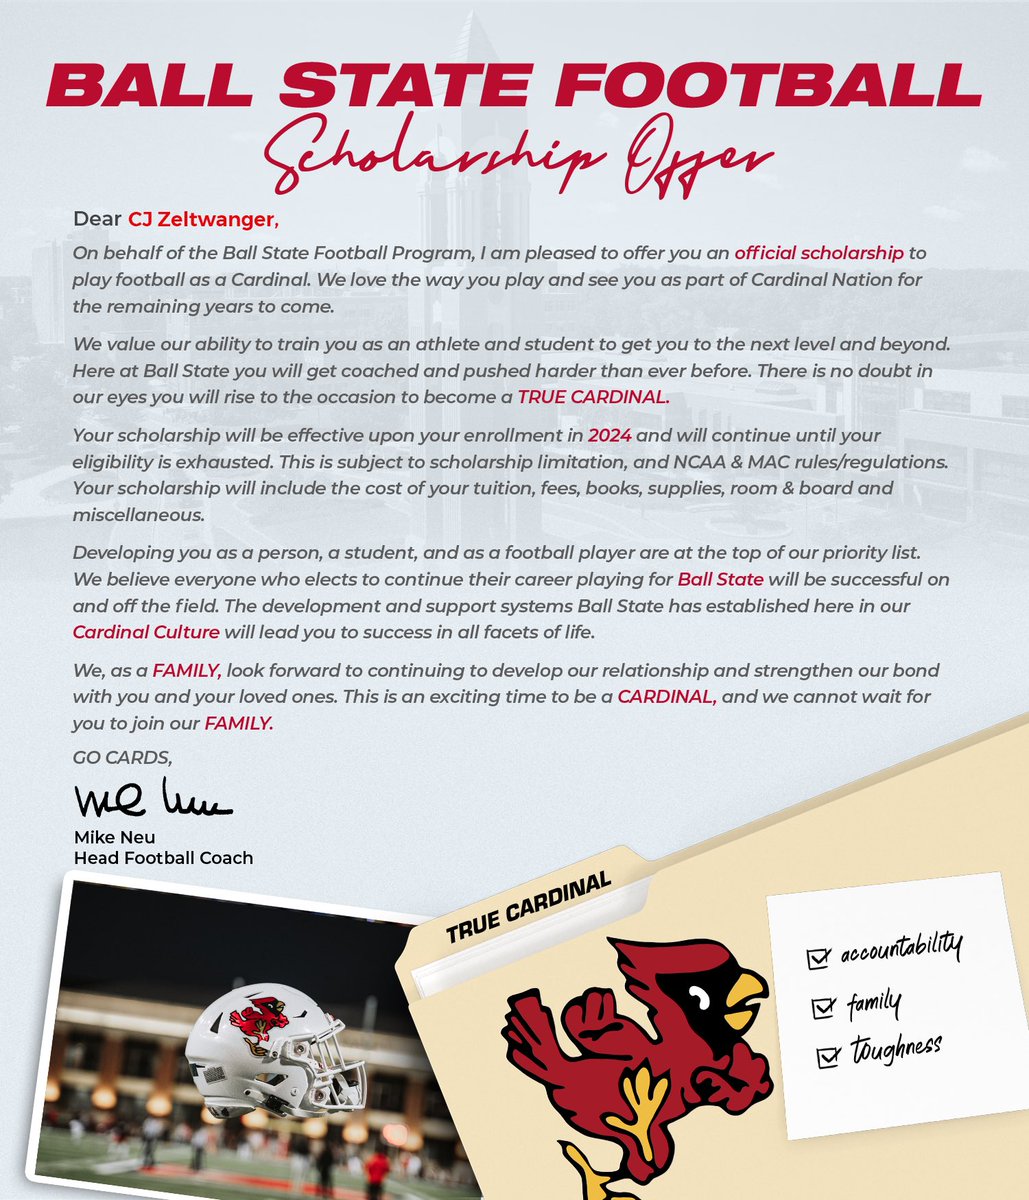 Beyond grateful to have received my official scholarship offer from @BallStateFB, can’t wait to join the family! @CoachJohnson64 @BSUCoachNeu @CoachAI @_CoachHoov